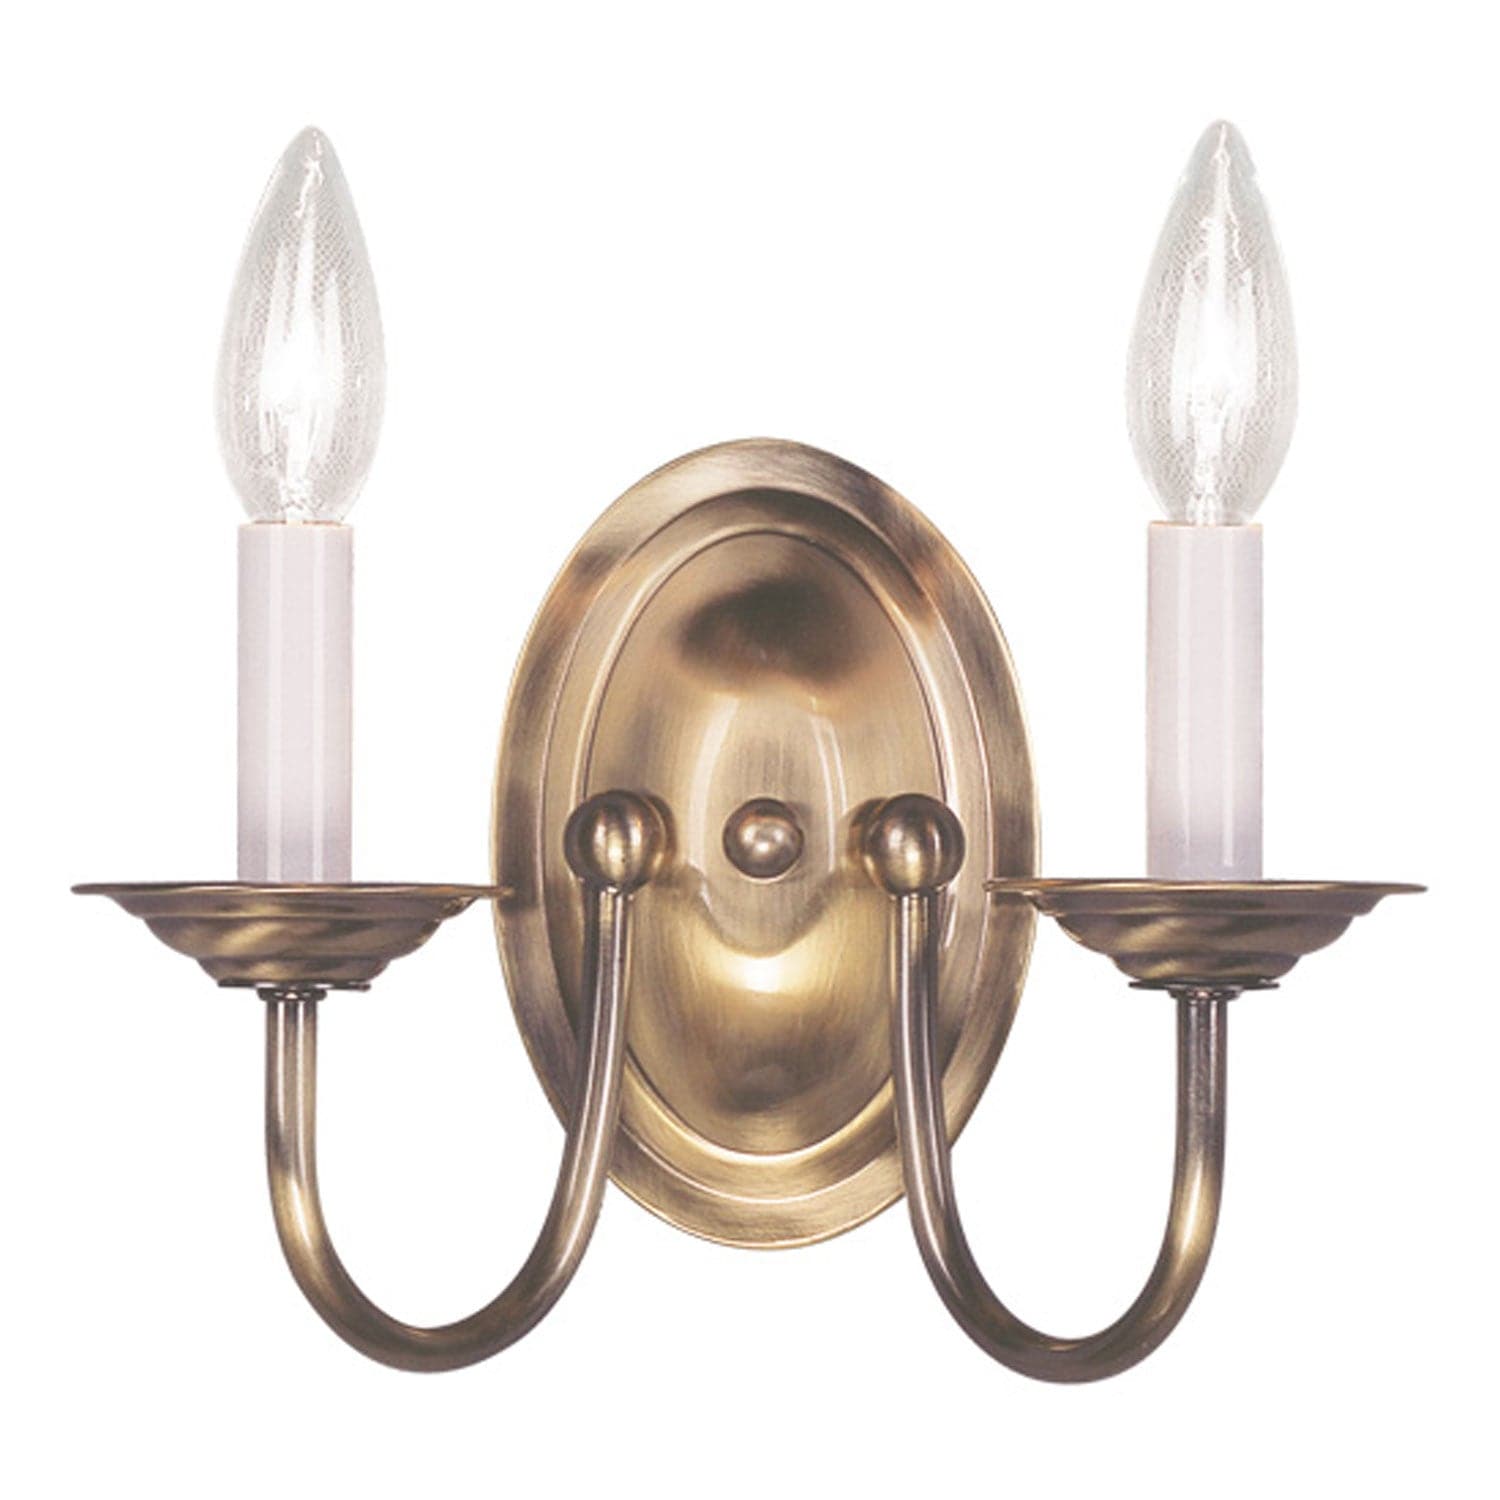 Livex Lighting - 4152-01 - Two Light Wall Sconce - Home Basics - Antique Brass